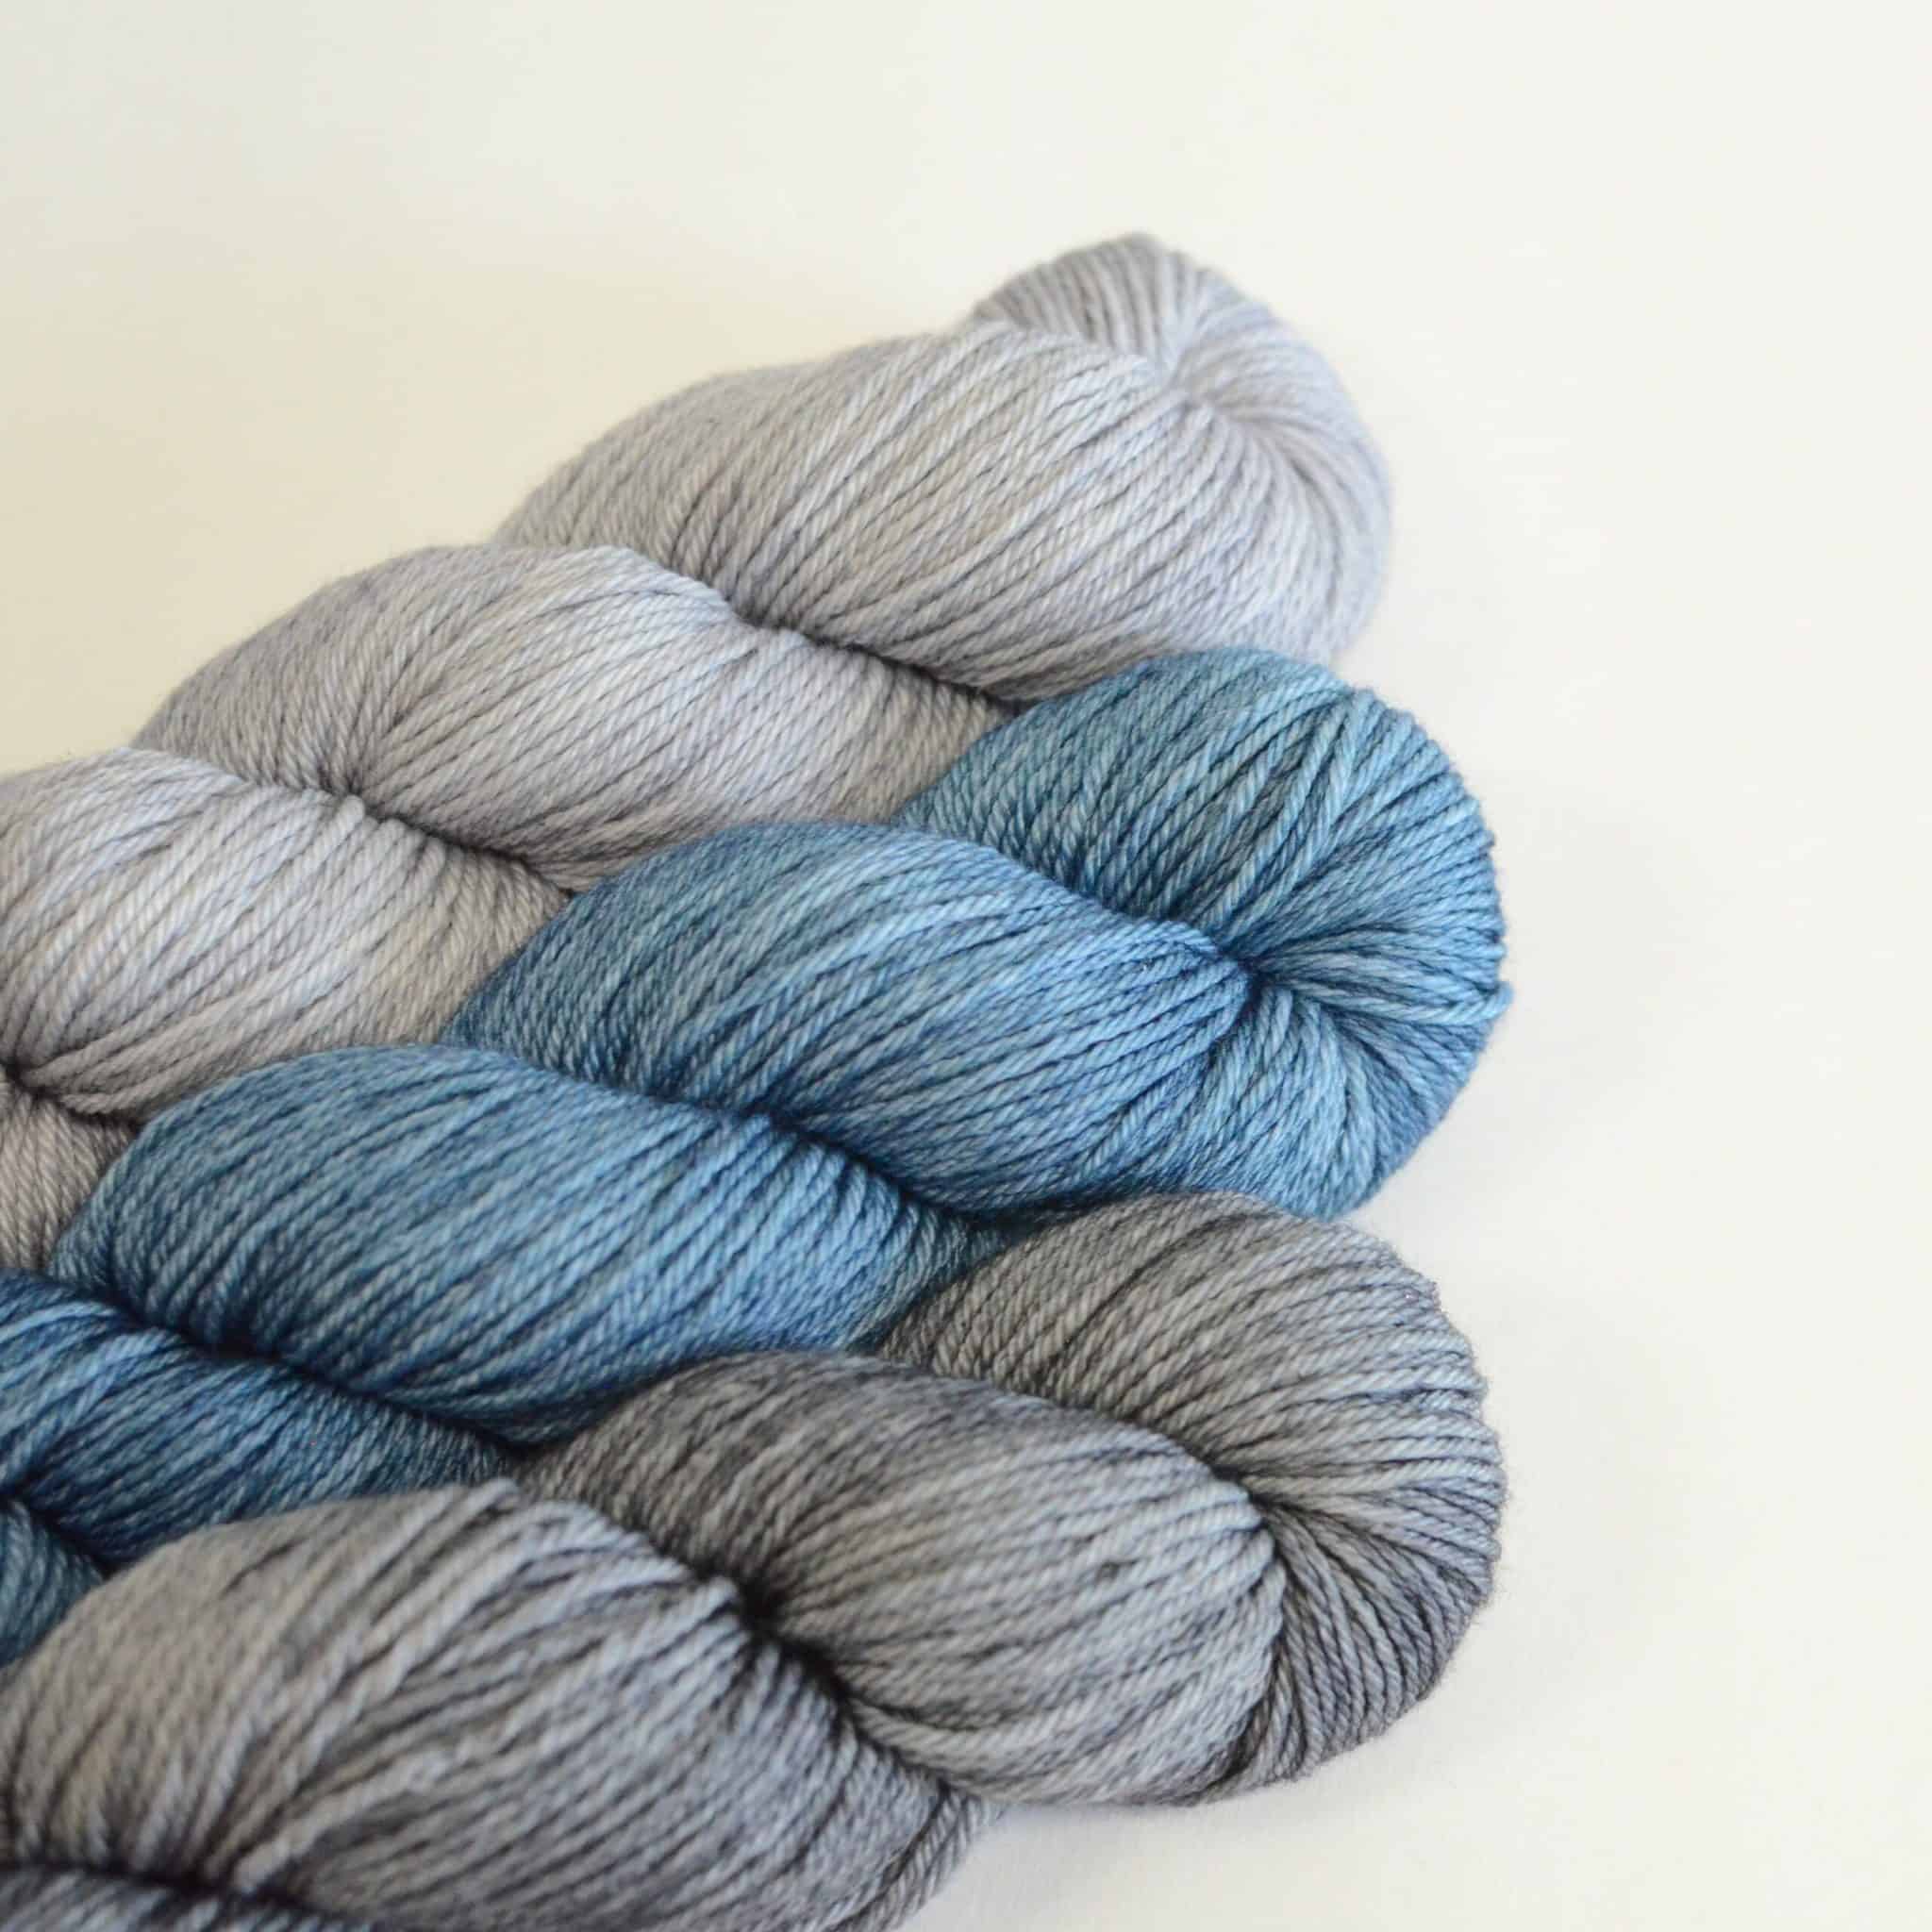 Skeins of gray and light blue yarn.